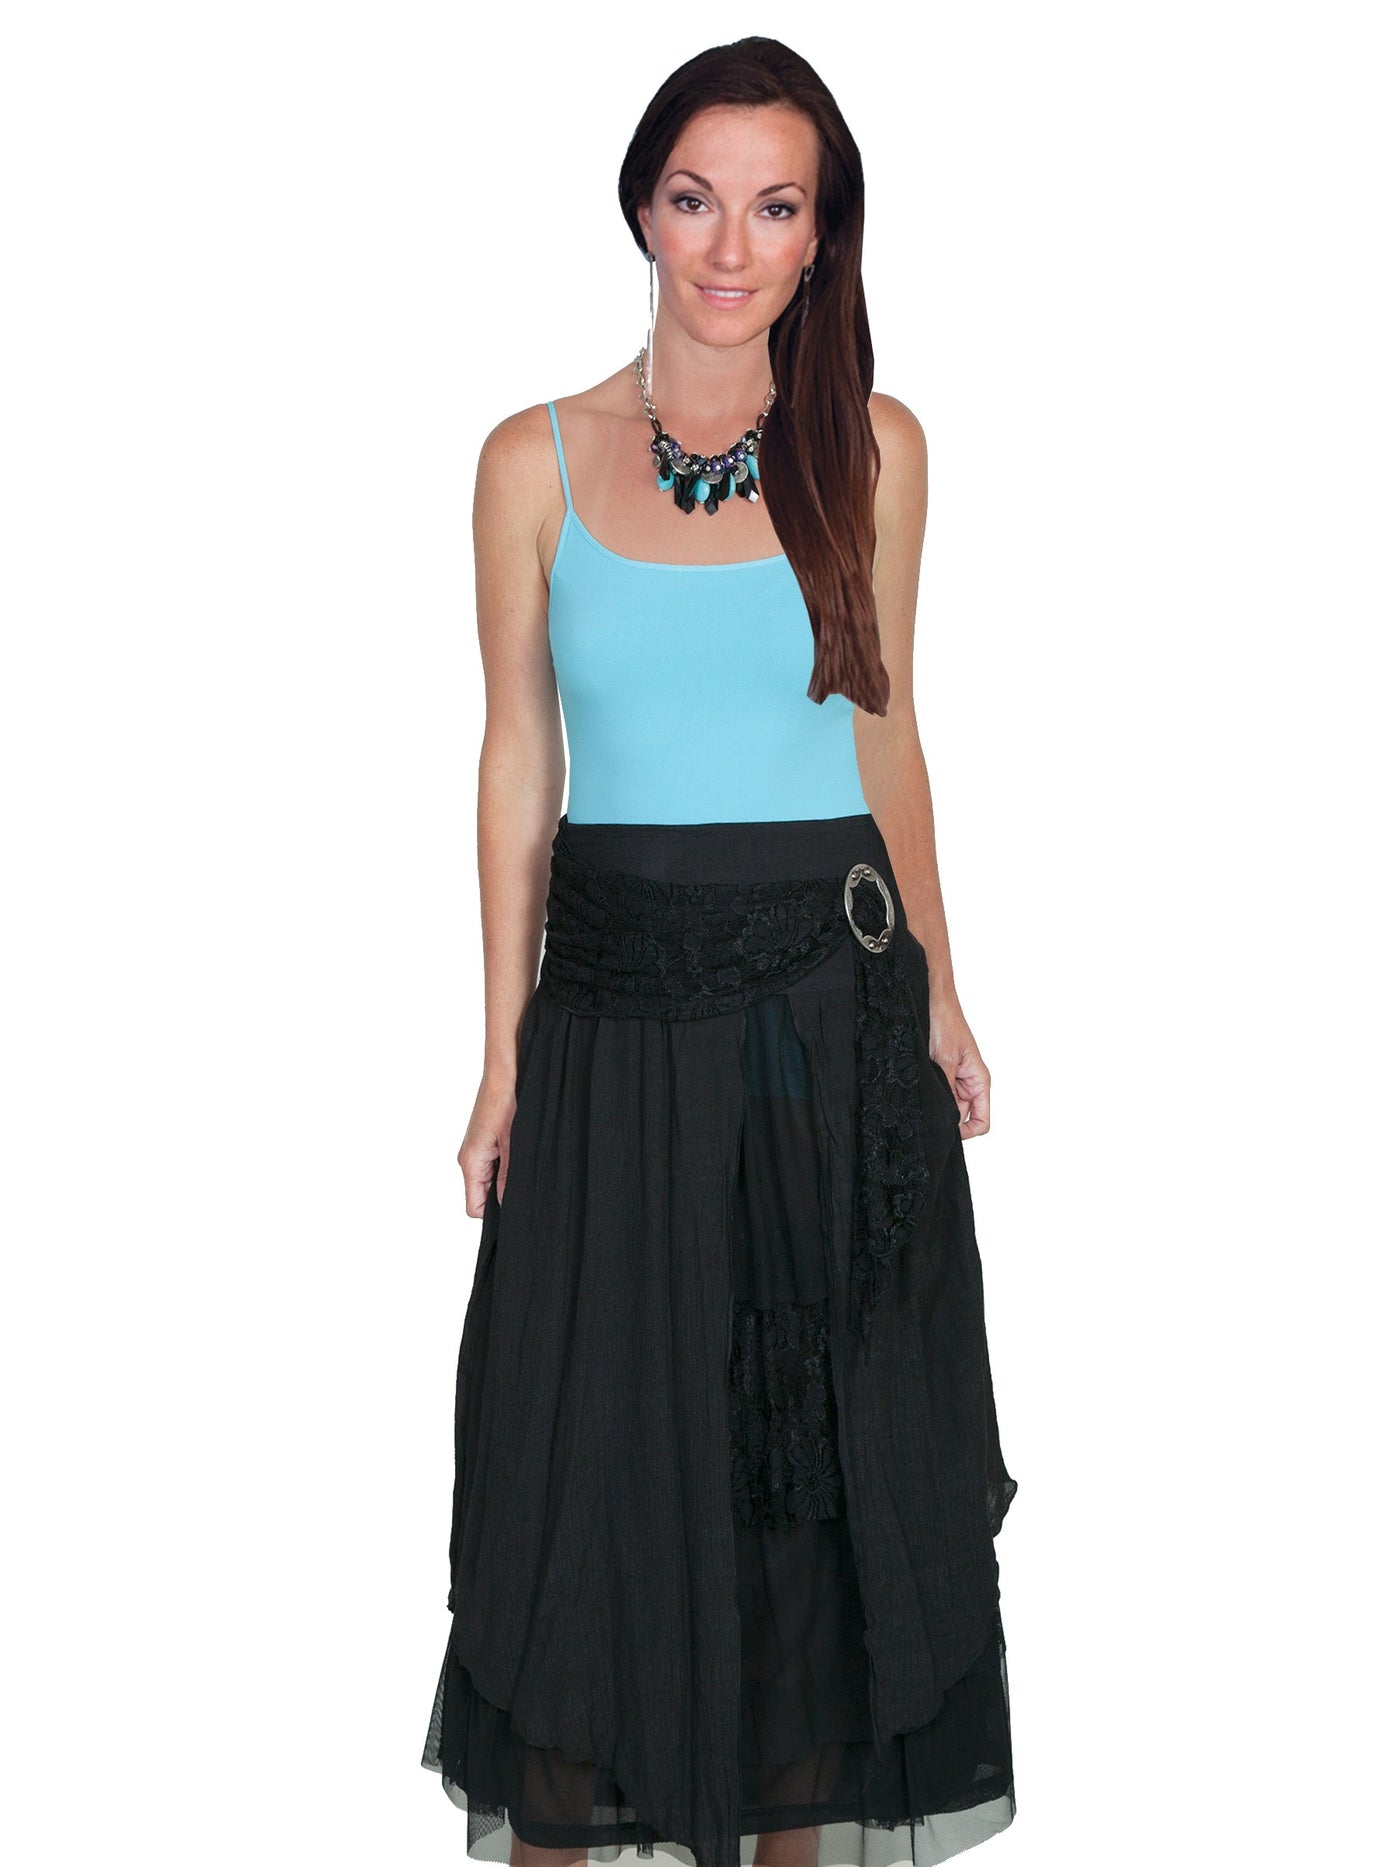 Western Style Multi-Layered Skirt in Black - SOLD OUT